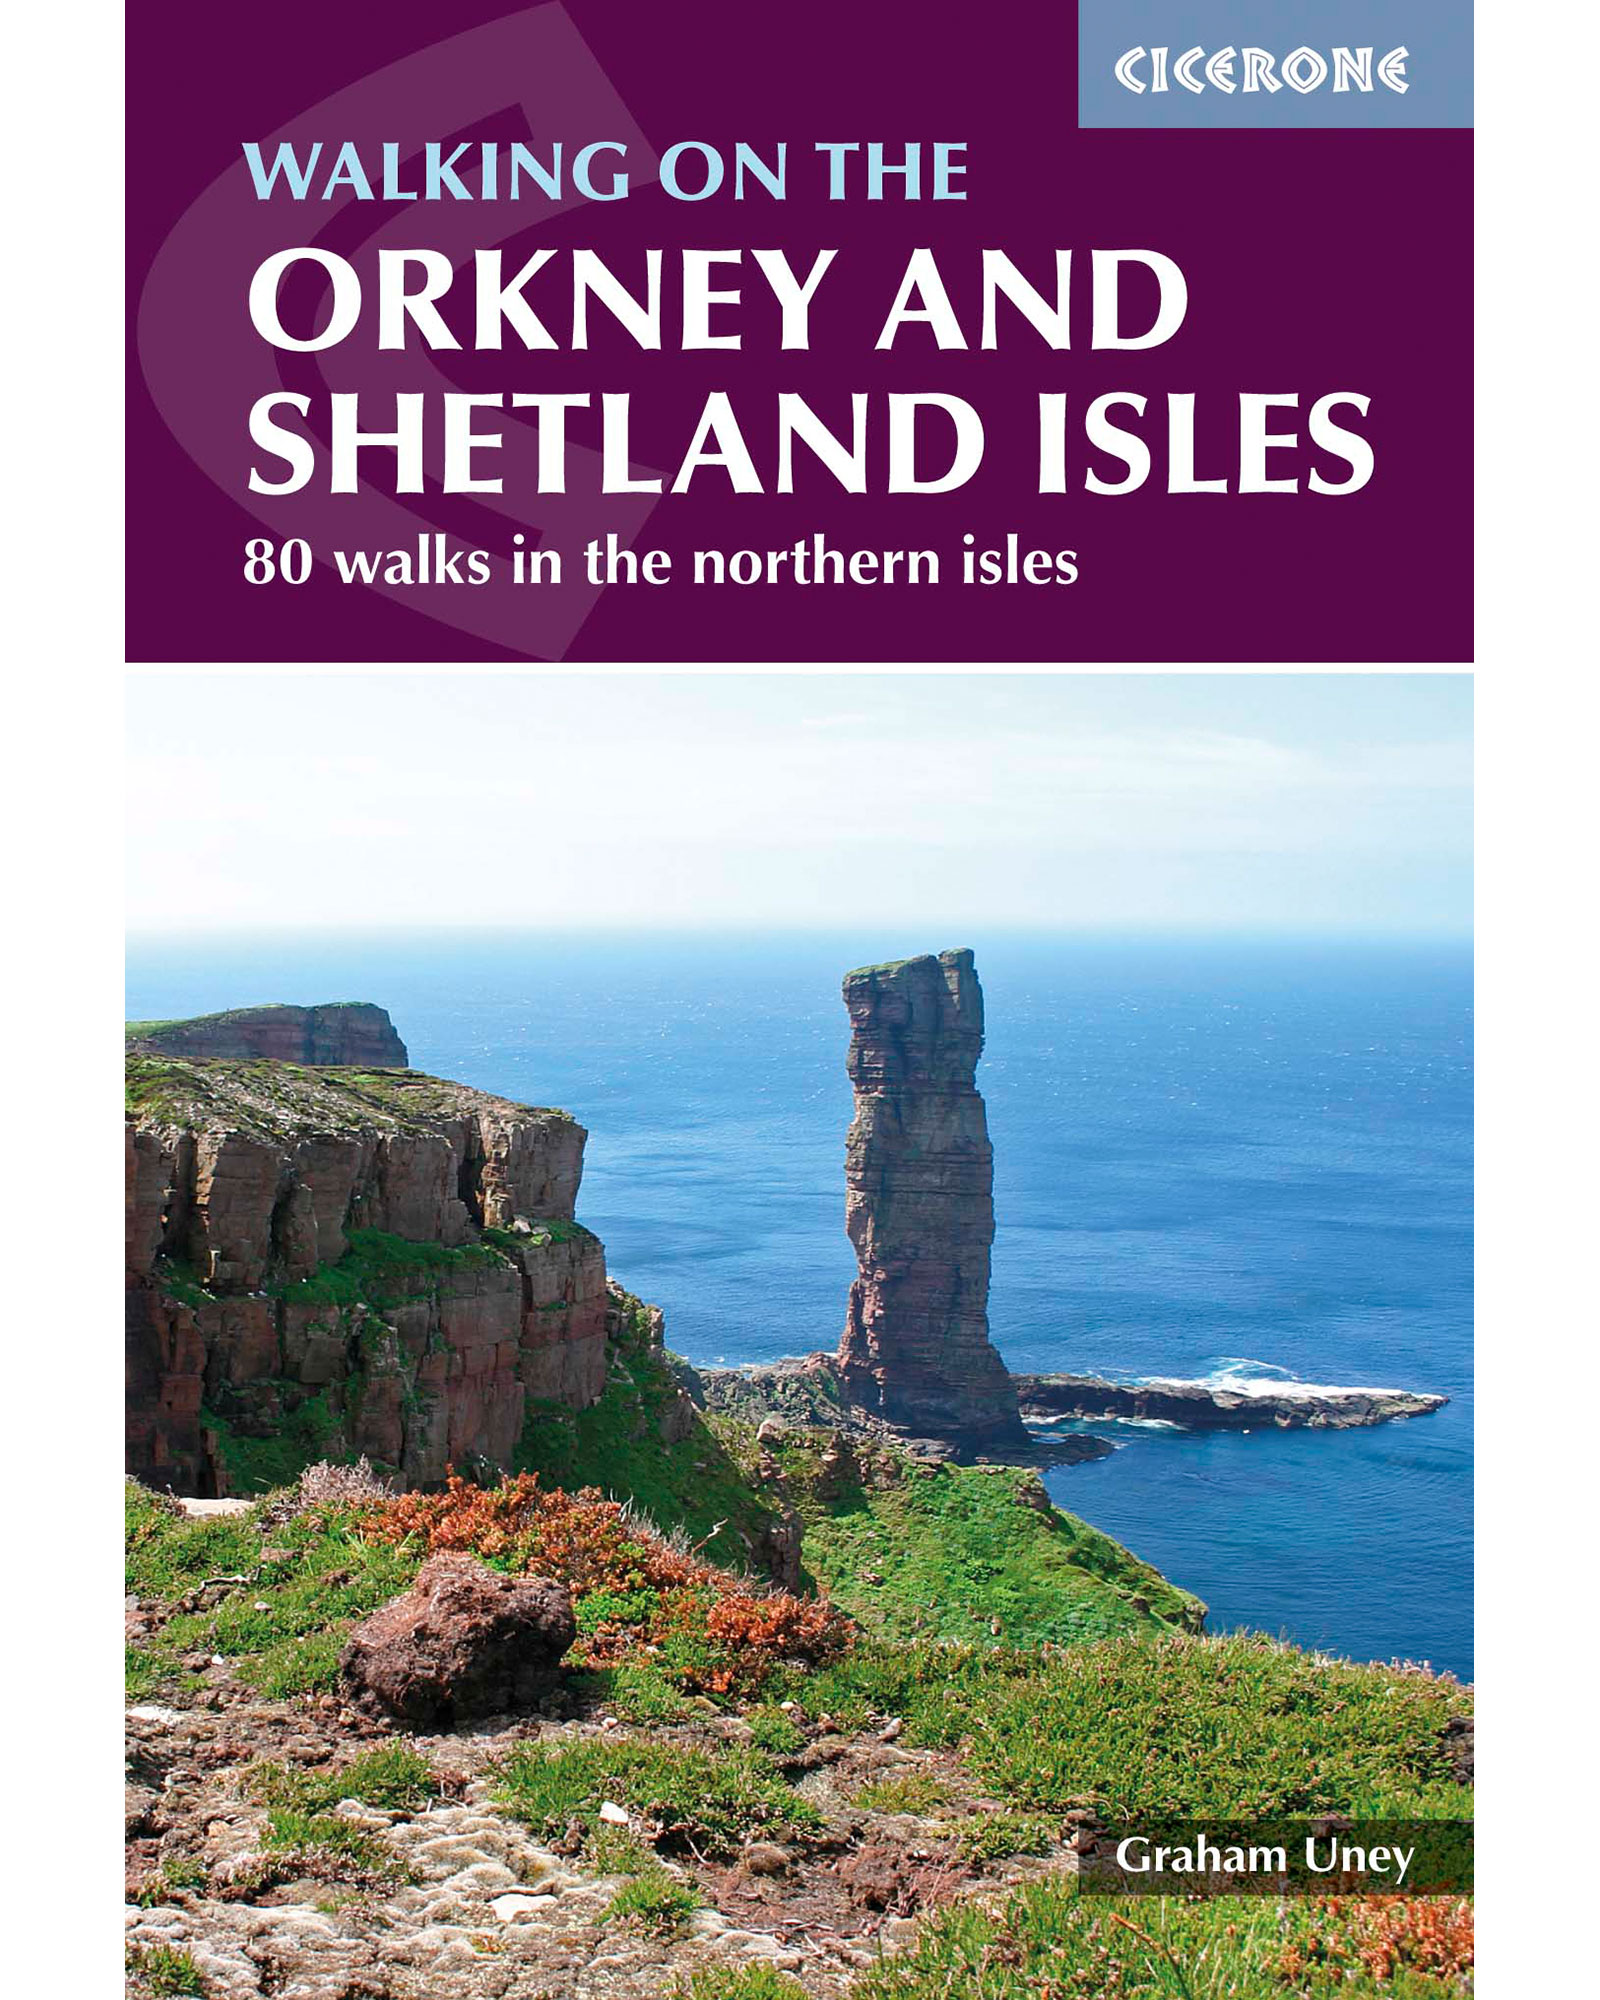 Cicerone Walking On The Orkney And Shetland Isles Guide Book